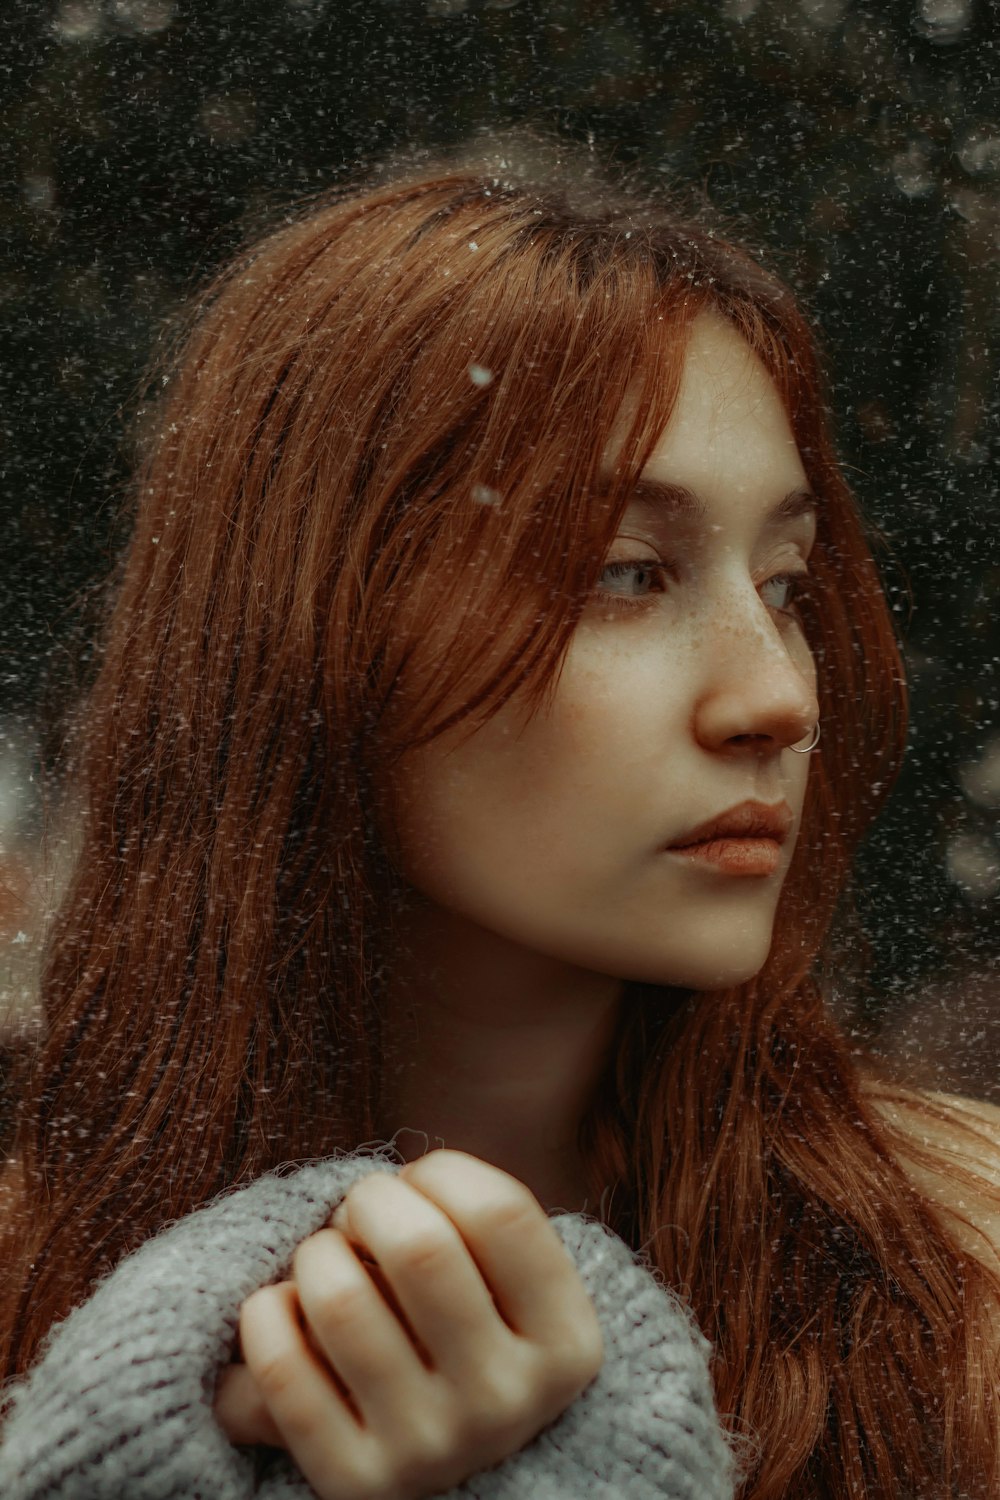 a woman with long red hair is standing in the snow